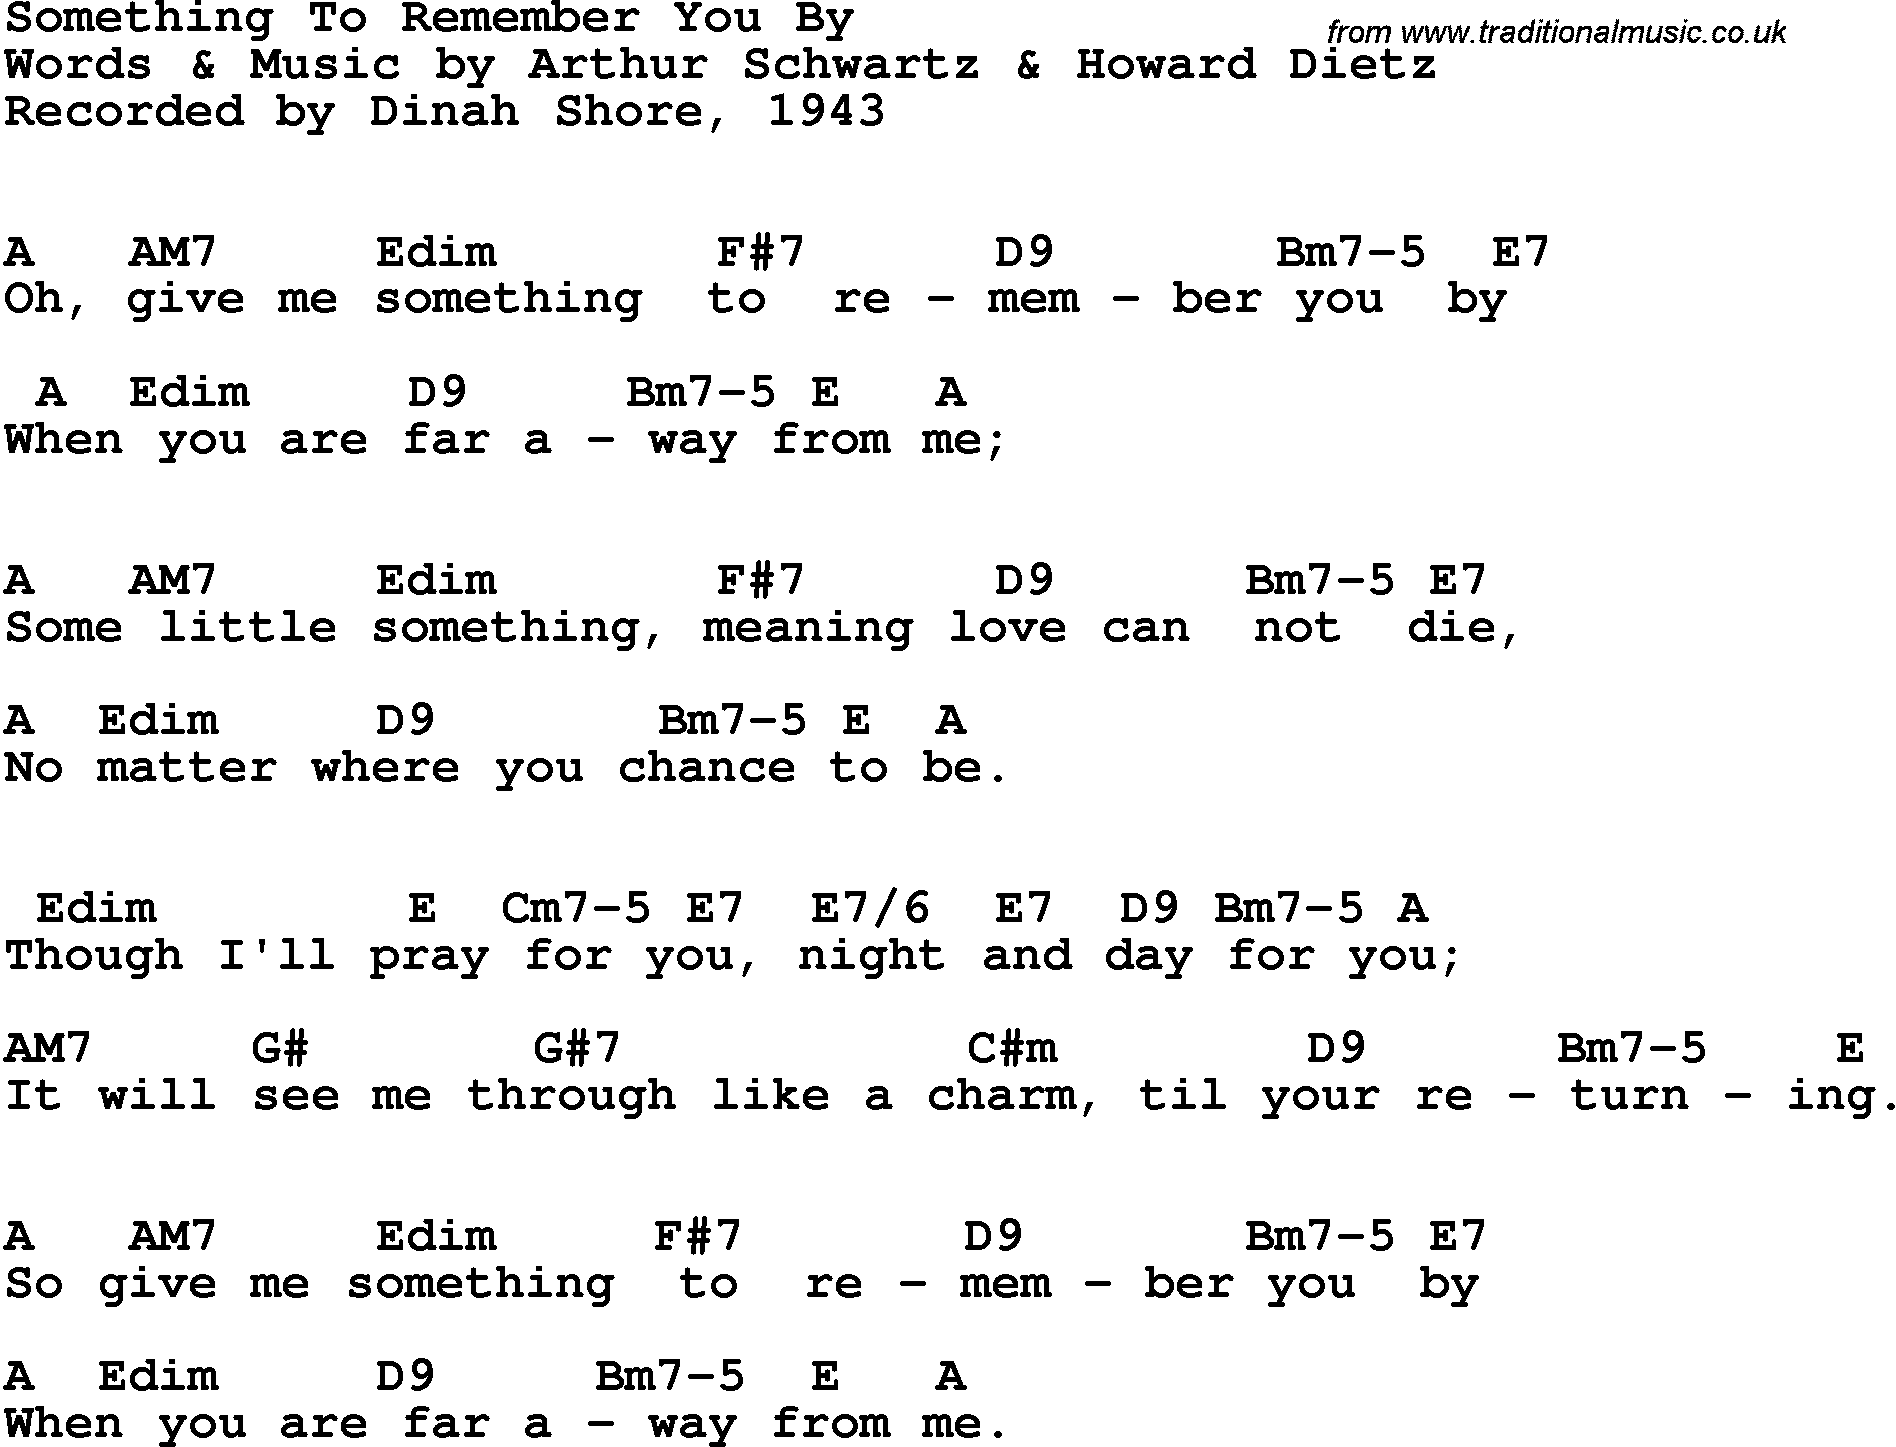 Song Lyrics with guitar chords for Something To Remember You By - Dinah Shore, 1943